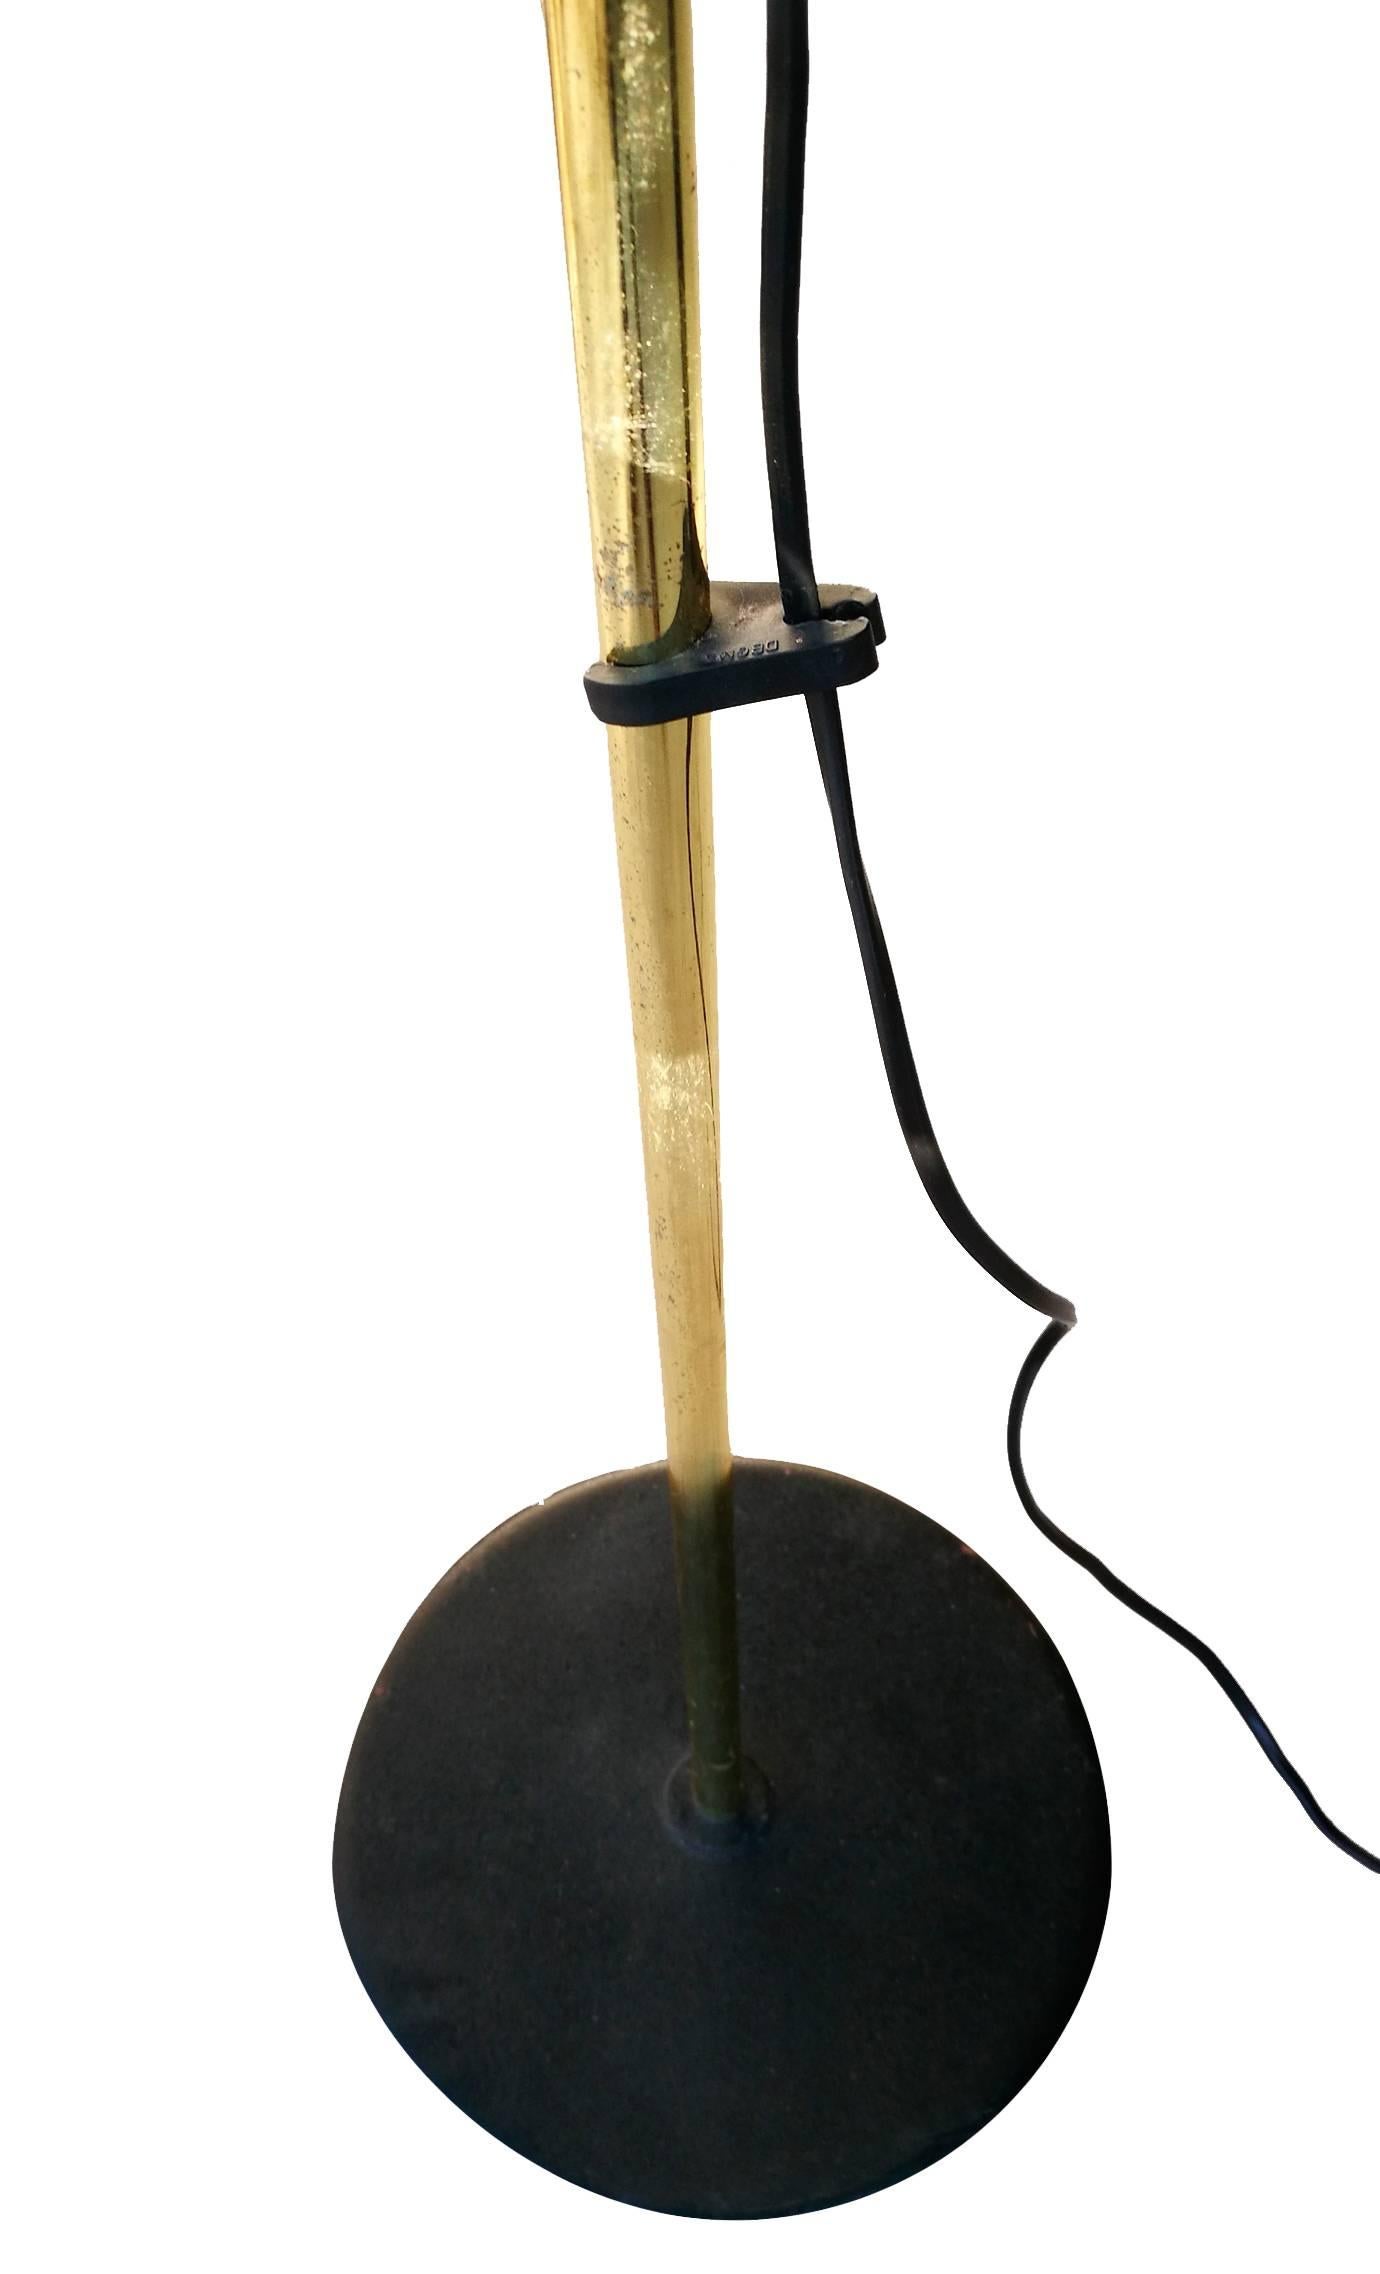 1980s standing lamp with a black iron base topped with a spherical acrylic dome.






